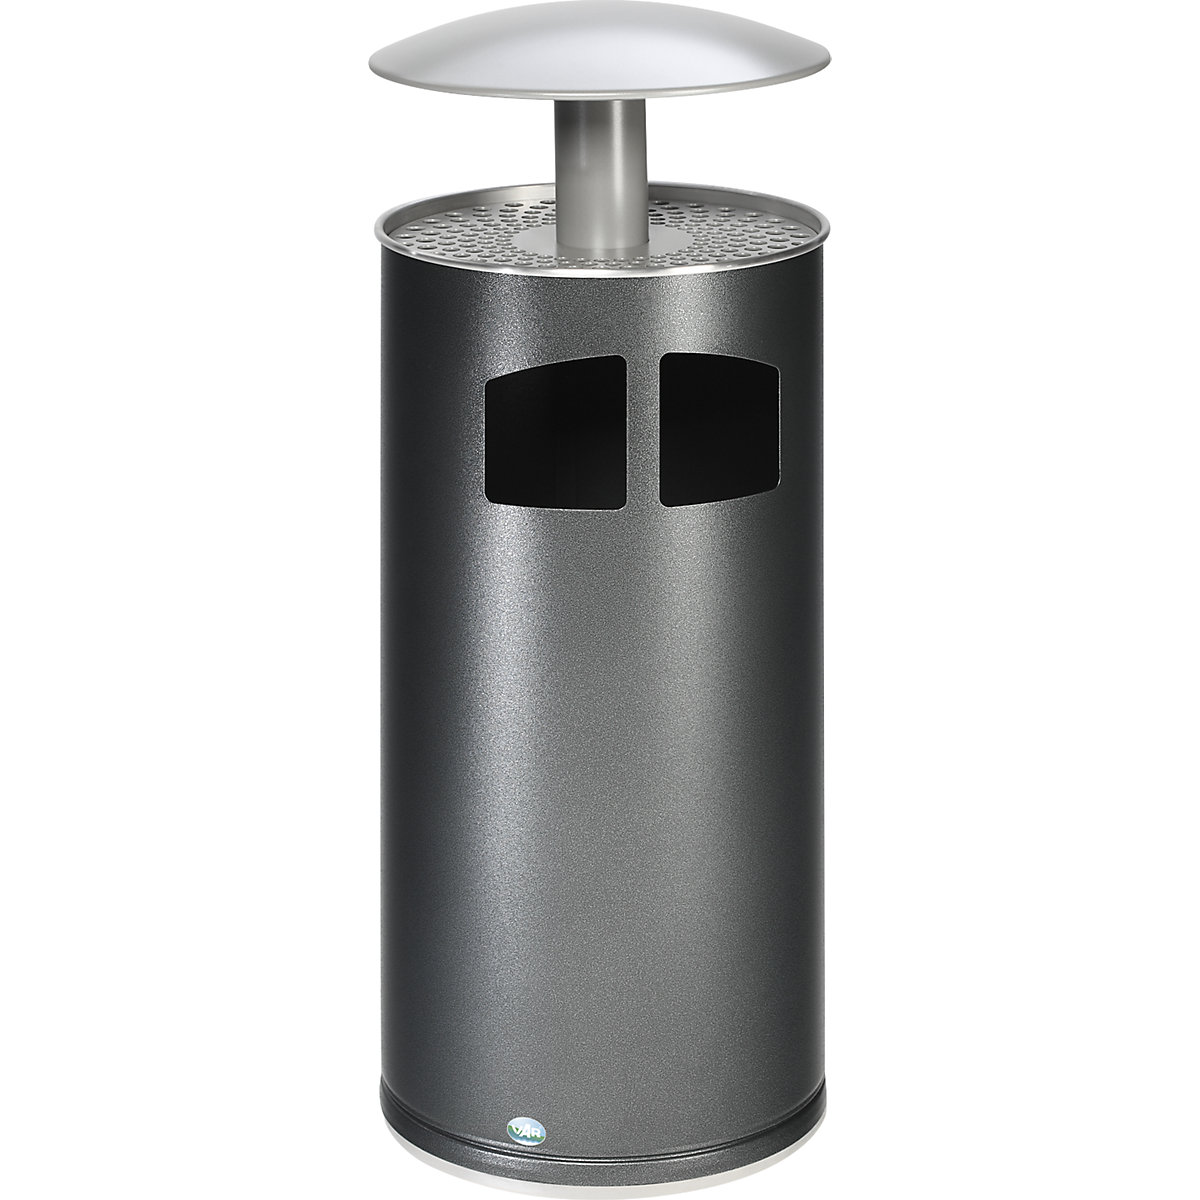 Waste collector/ashtray including inner container - VAR